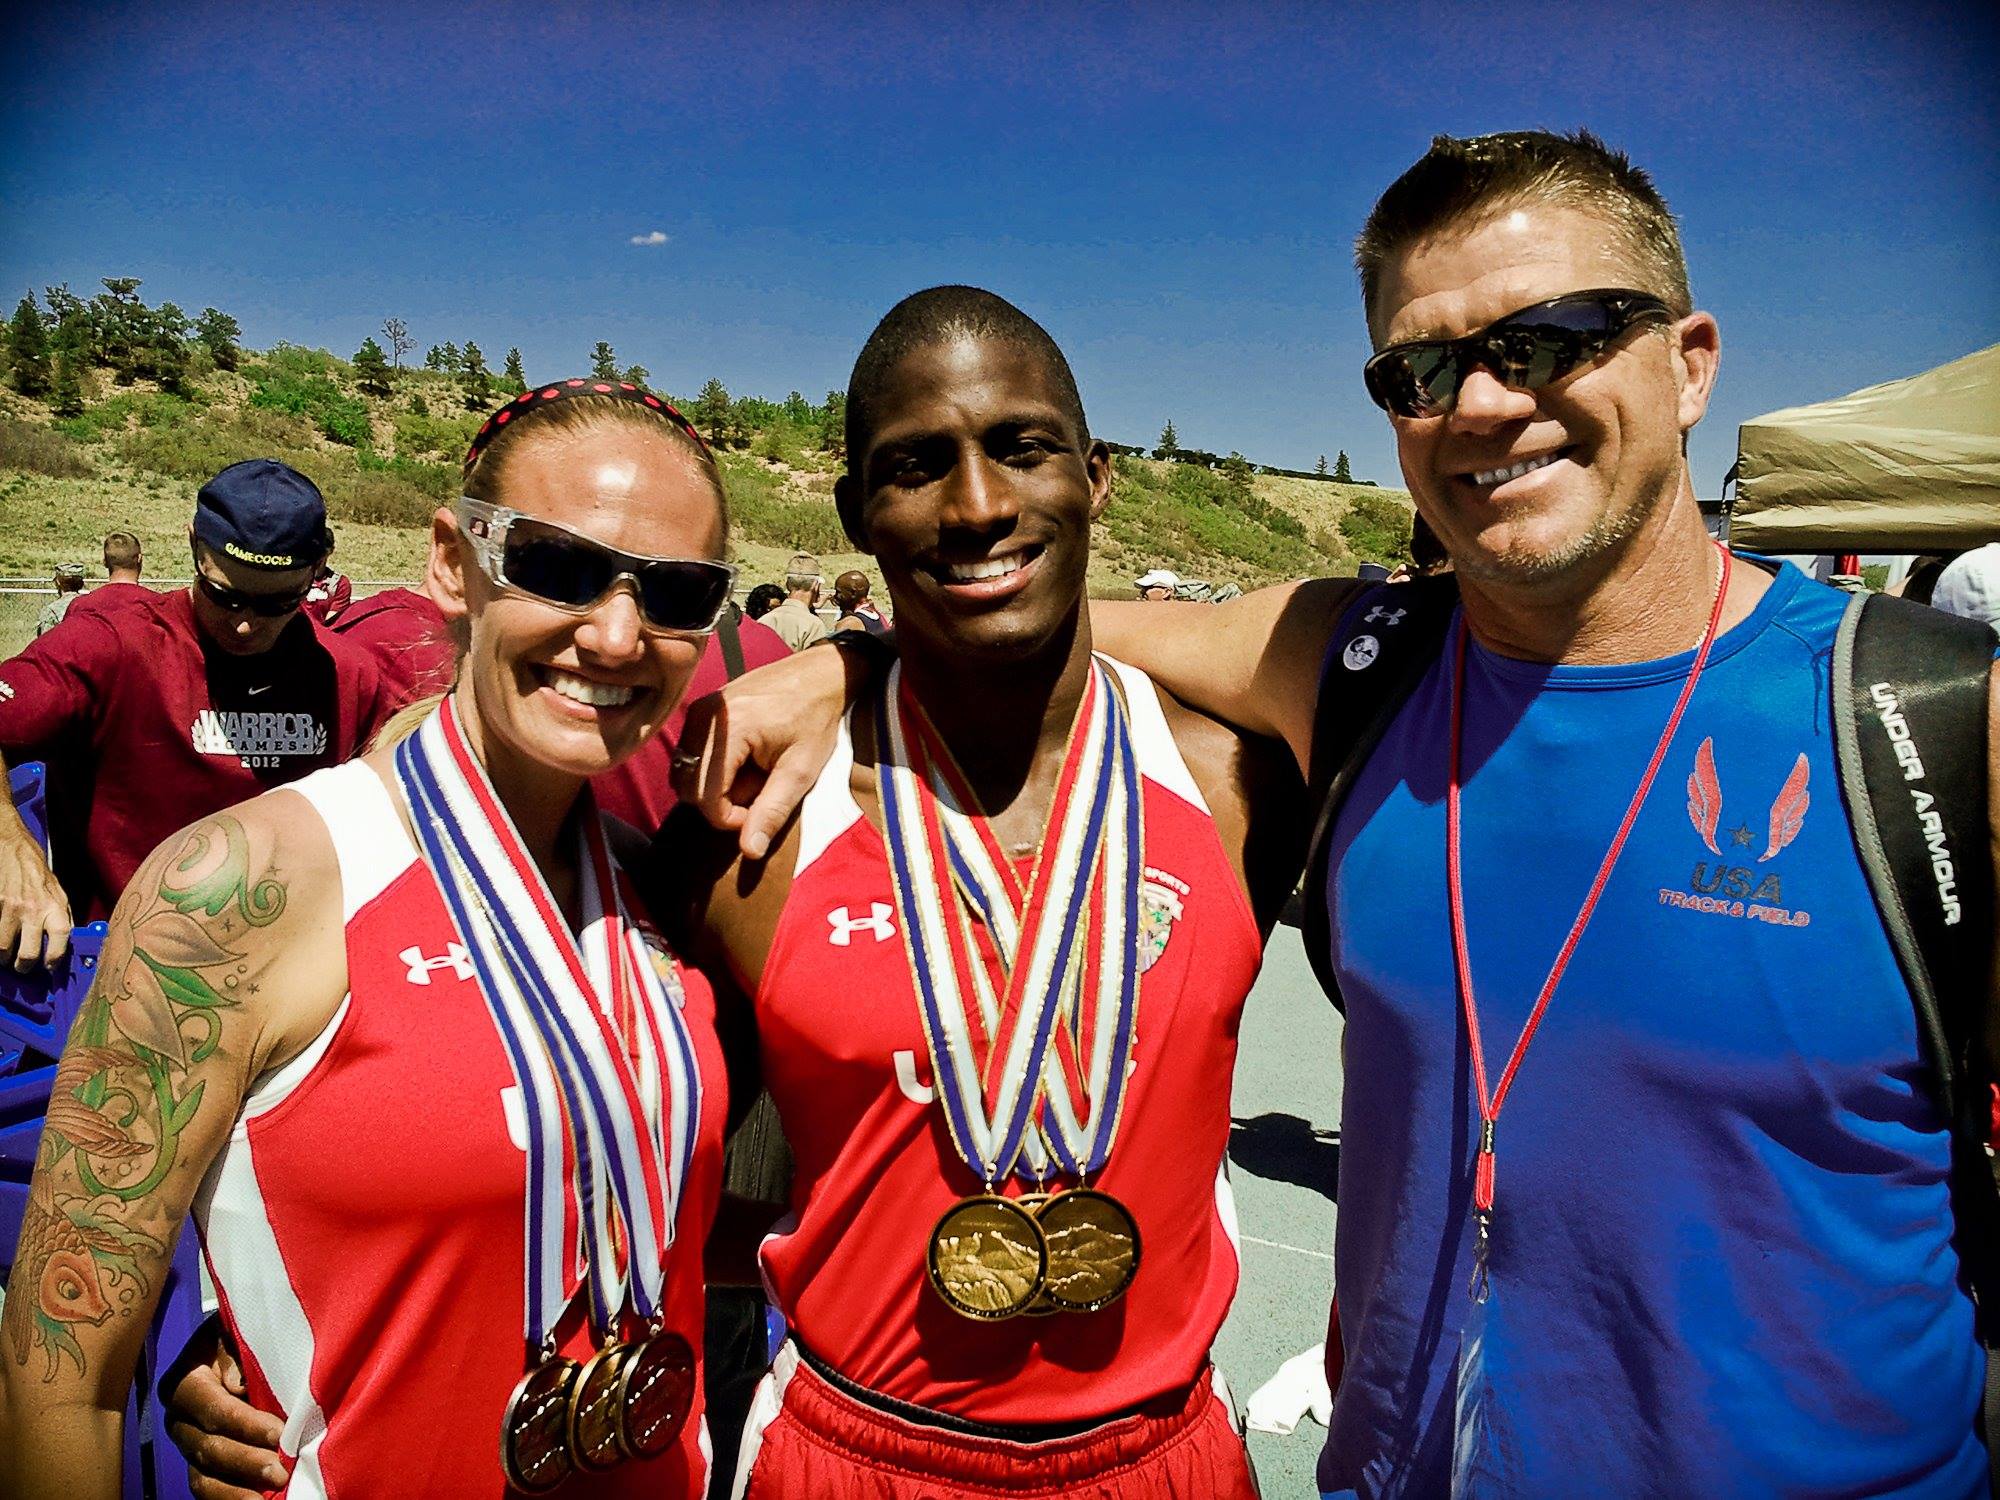 Daniel Smith with Marine athletes at the 2012 Warrior Games